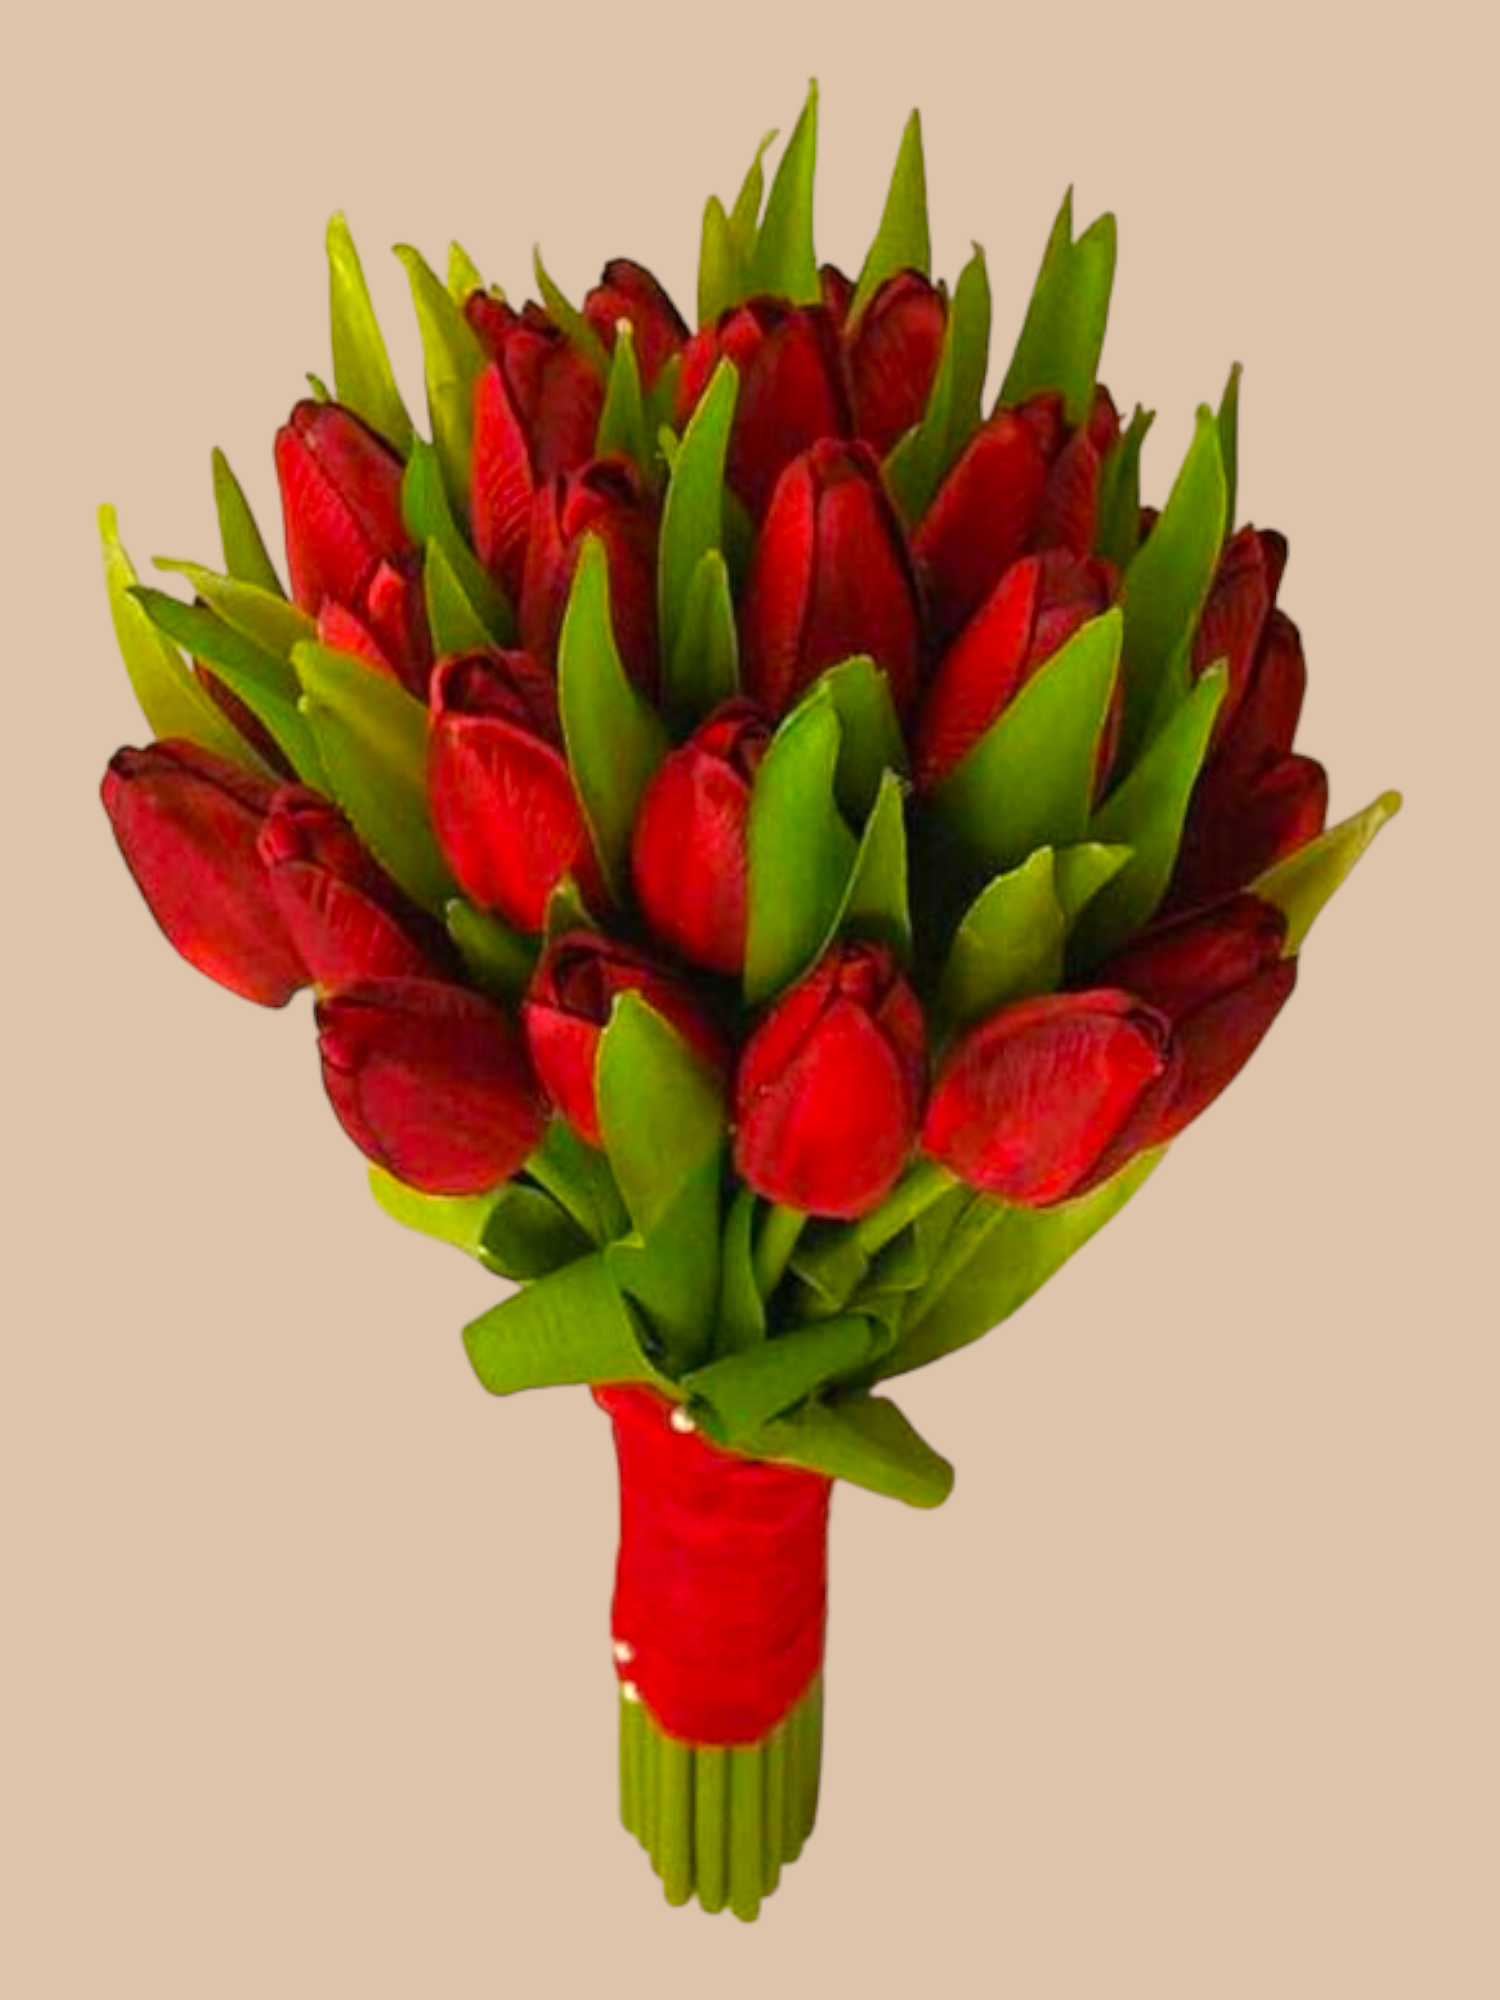 Spread the Love Hand Bouquet Delivery in Dubai and Sharjah